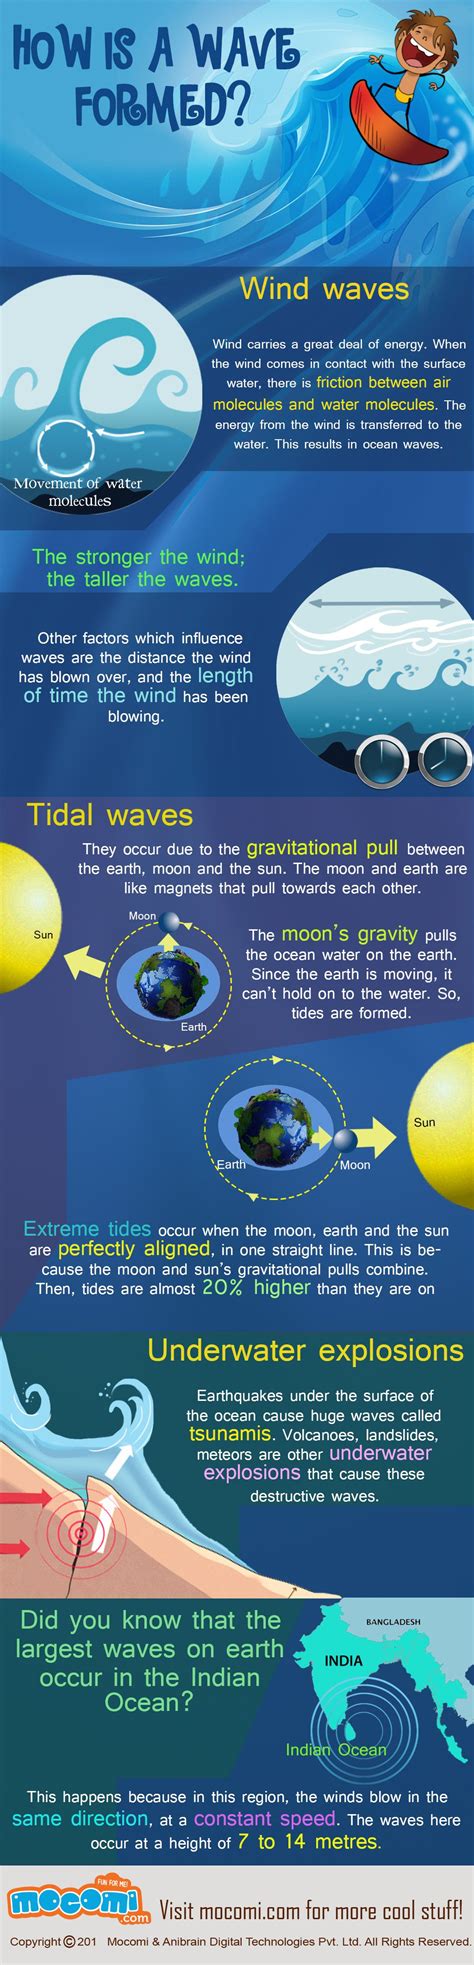 How Are Waves Formed Process And Facts Geography For Kids Mocomi